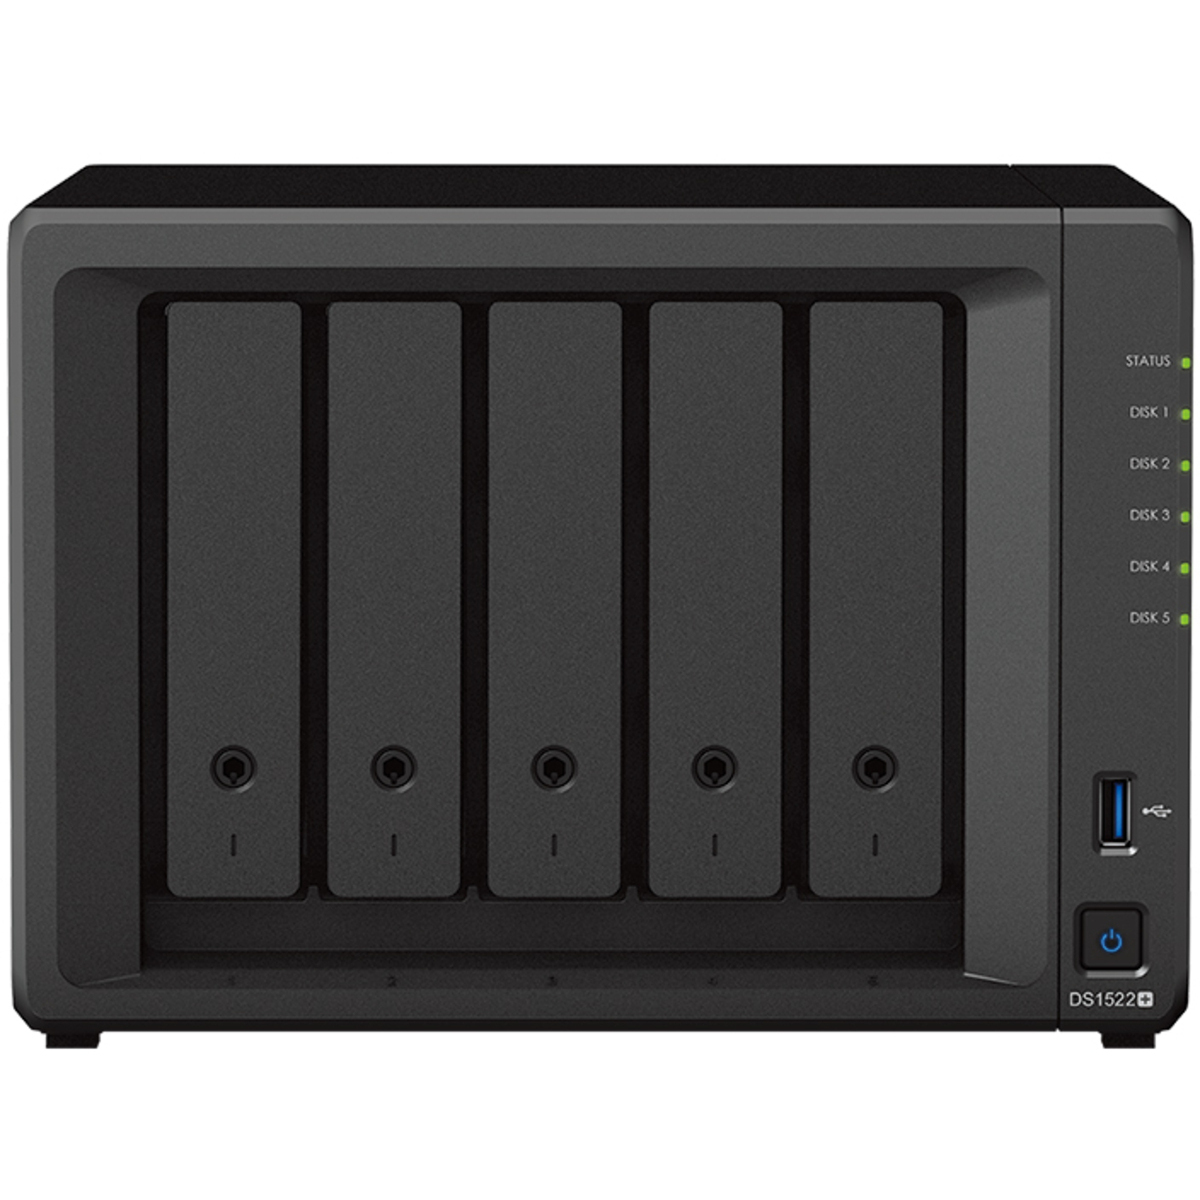 buy Synology DiskStation DS1522+ 110tb Desktop NAS - Network Attached Storage Device 5x22000gb Western Digital Ultrastar HC570 WUH722222ALE6L4 3.5 7200rpm SATA 6Gb/s HDD ENTERPRISE Class Drives Installed - Burn-In Tested - nas headquarters buy network attached storage server device das new raid-5 free shipping simply usa christmas holiday black friday cyber monday week sale happening now! DiskStation DS1522+